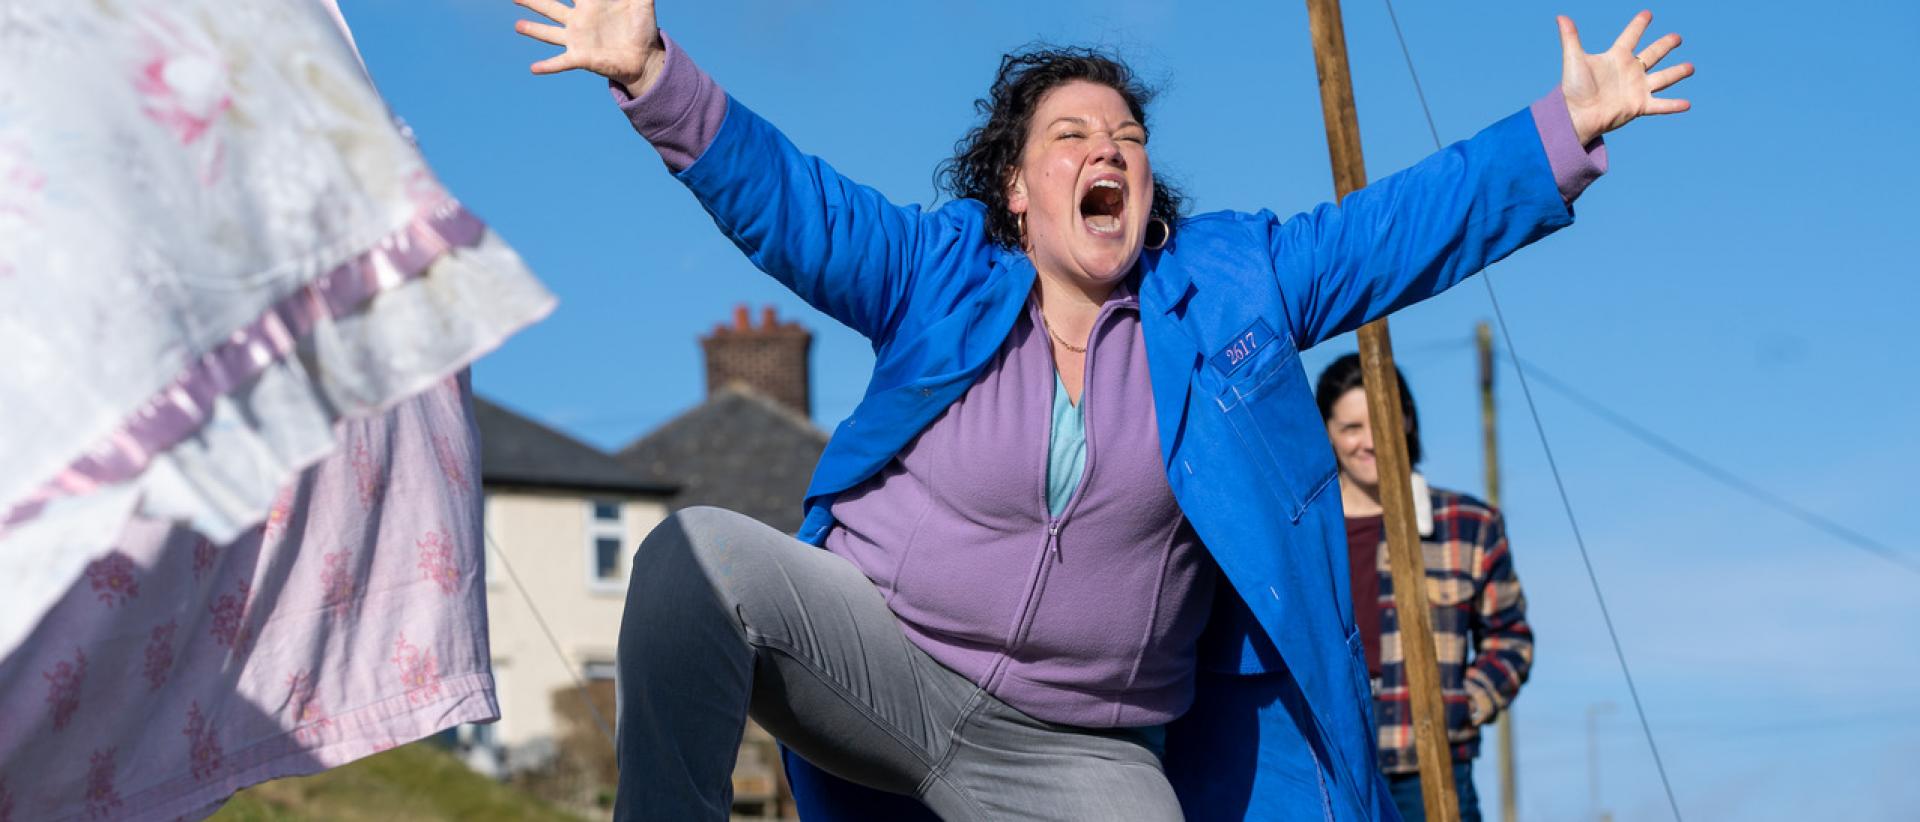 still from chuck chuck baby featuring a woman wearing a blue factory coat standing in front of a washing line and singing with her arms outstretched 